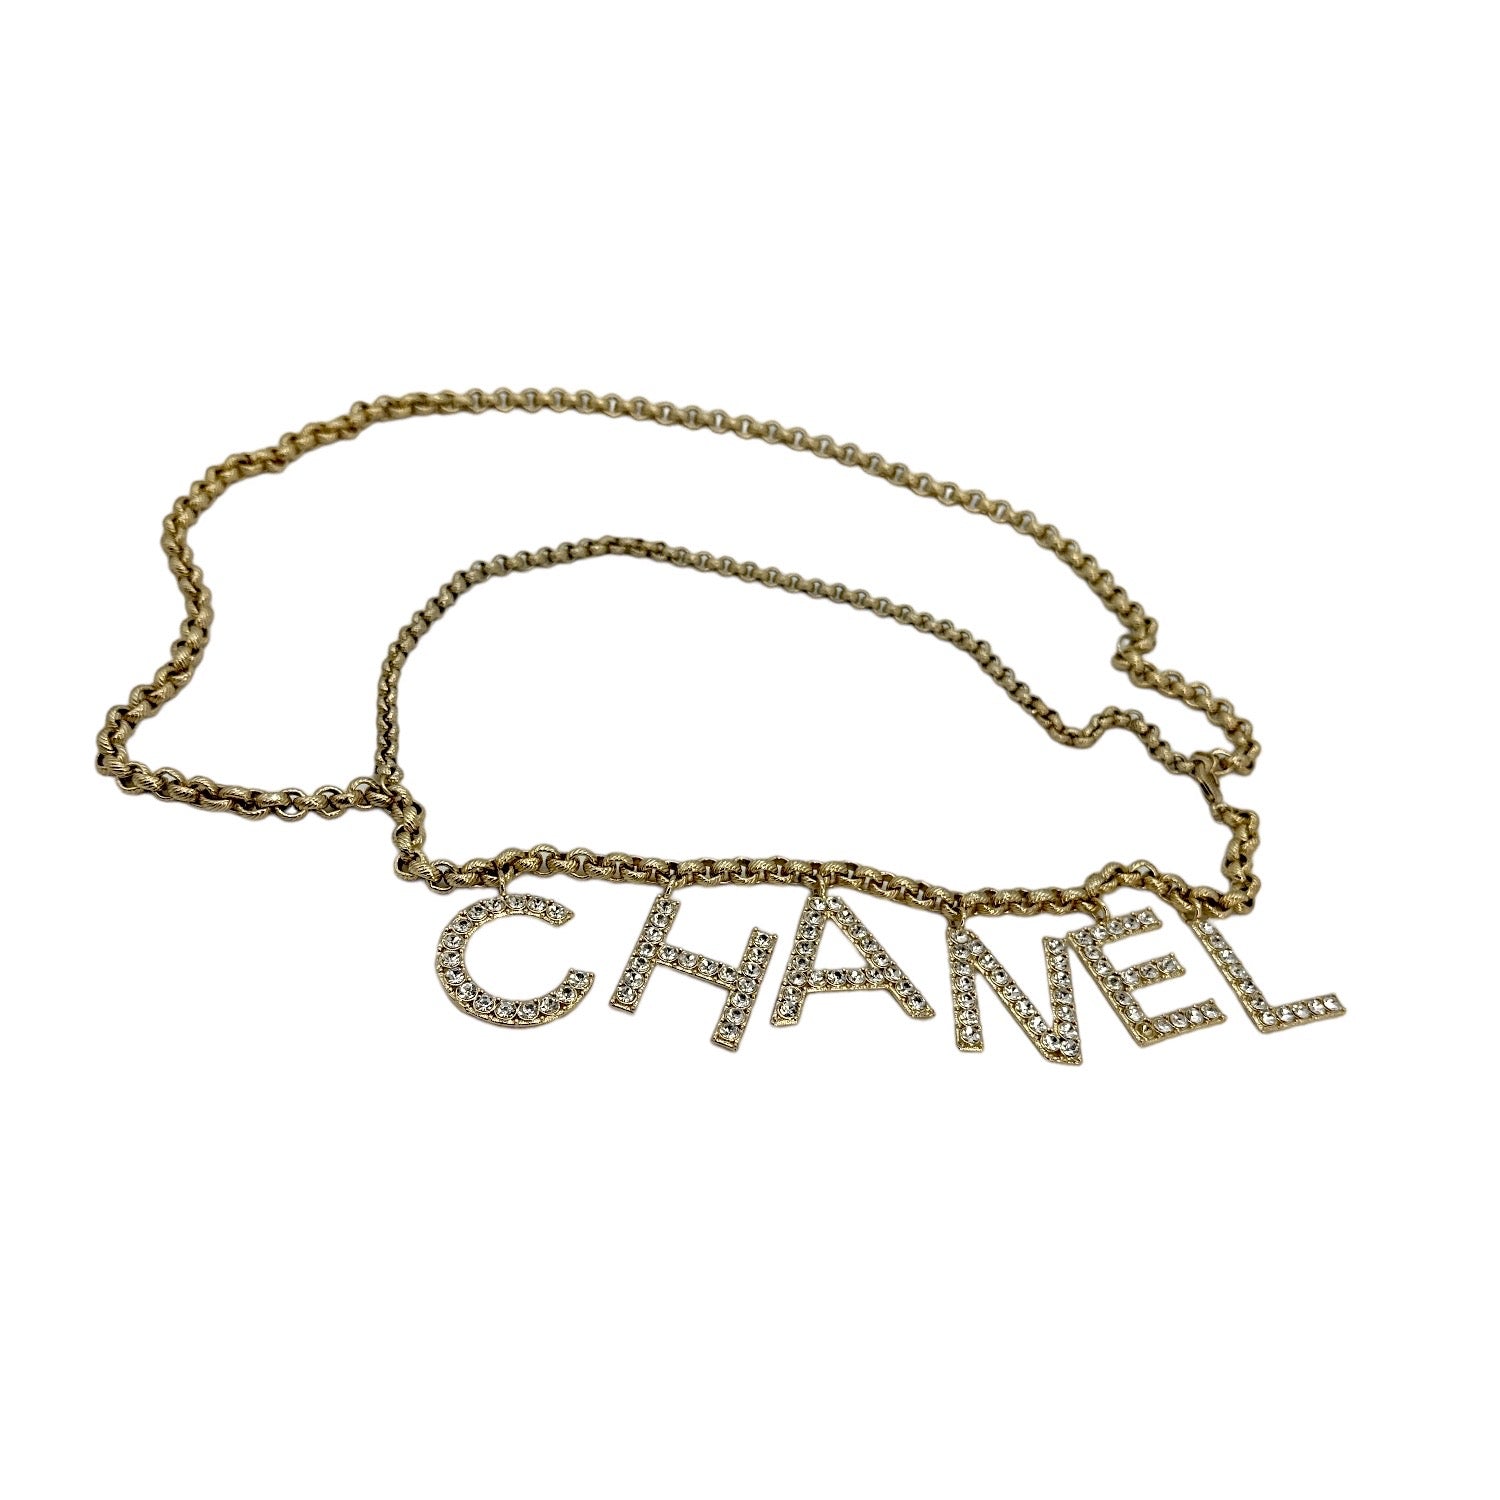 1980s Chanel Chain-link Belt with Double Sided Logo/Coco Chanel Coin - MRS  Couture